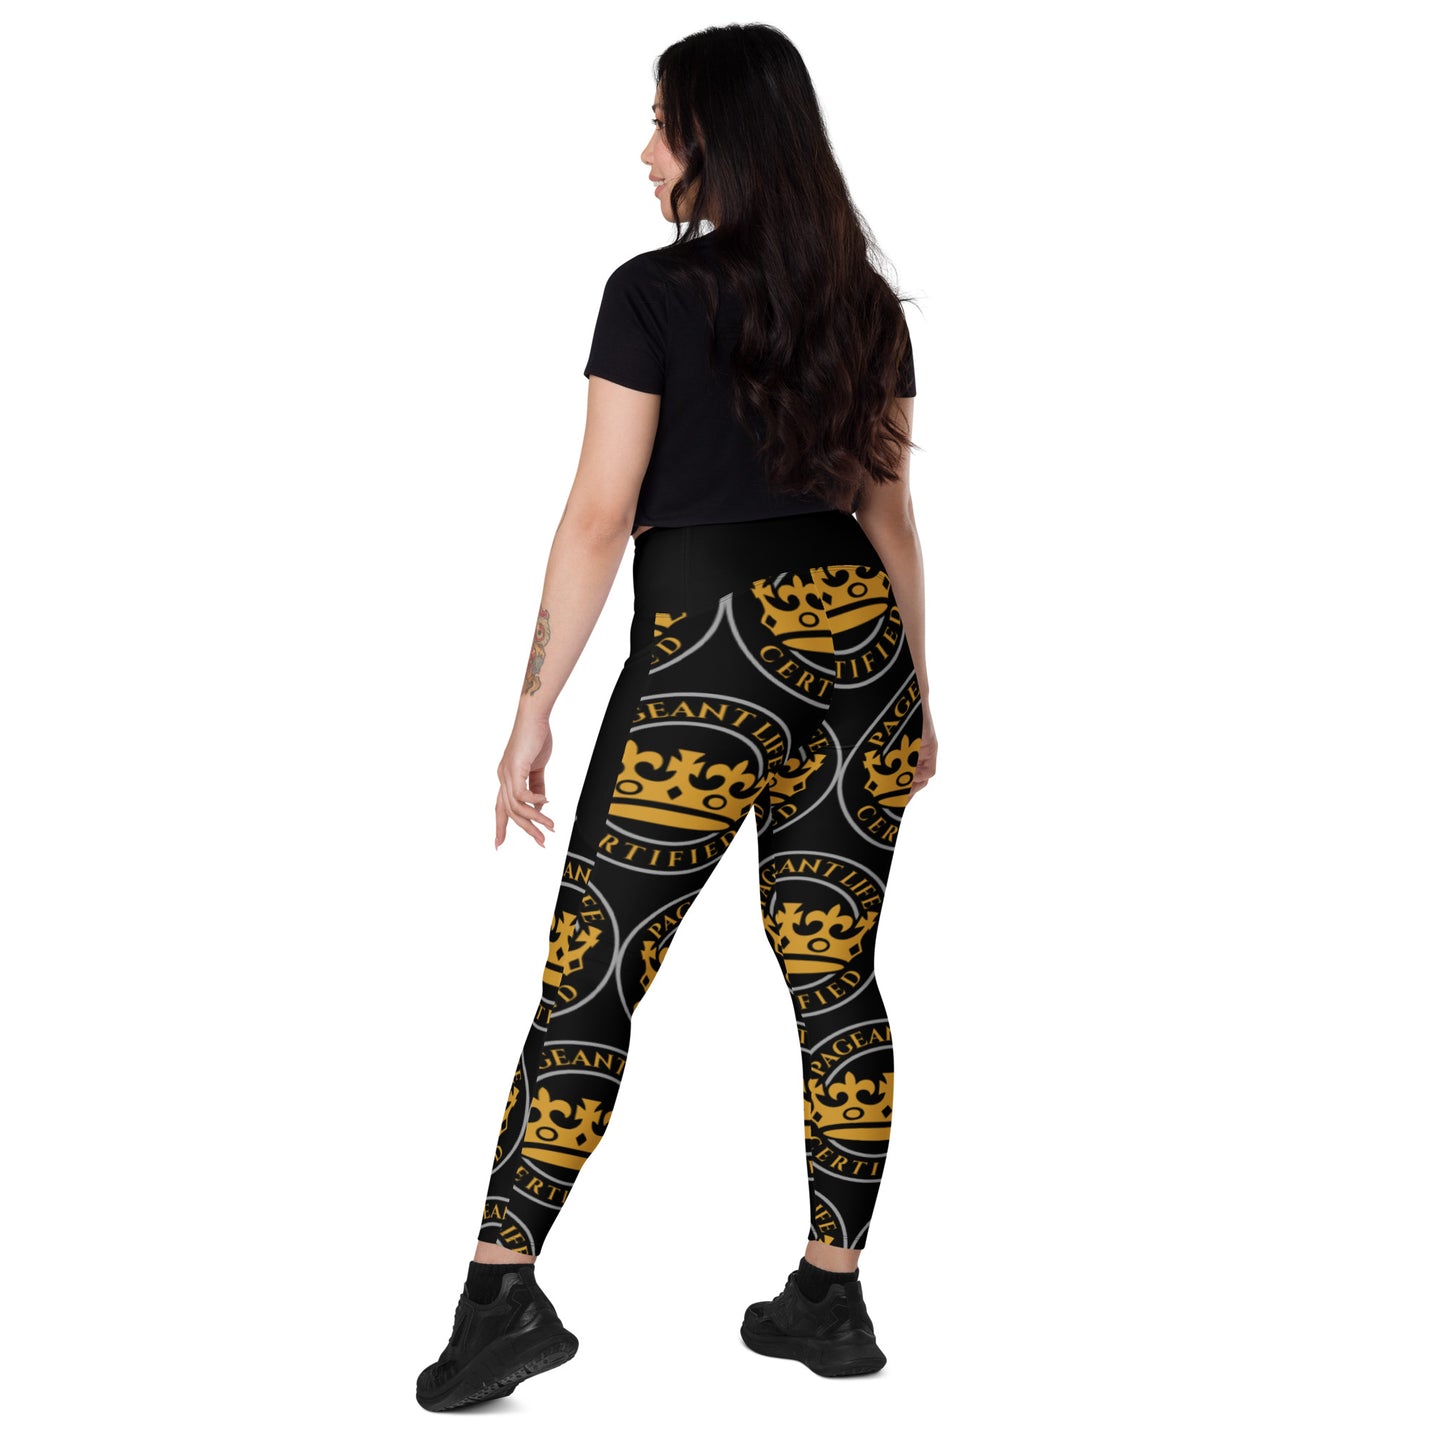 Black and Gold Pageant Life Certified Leggings with pockets